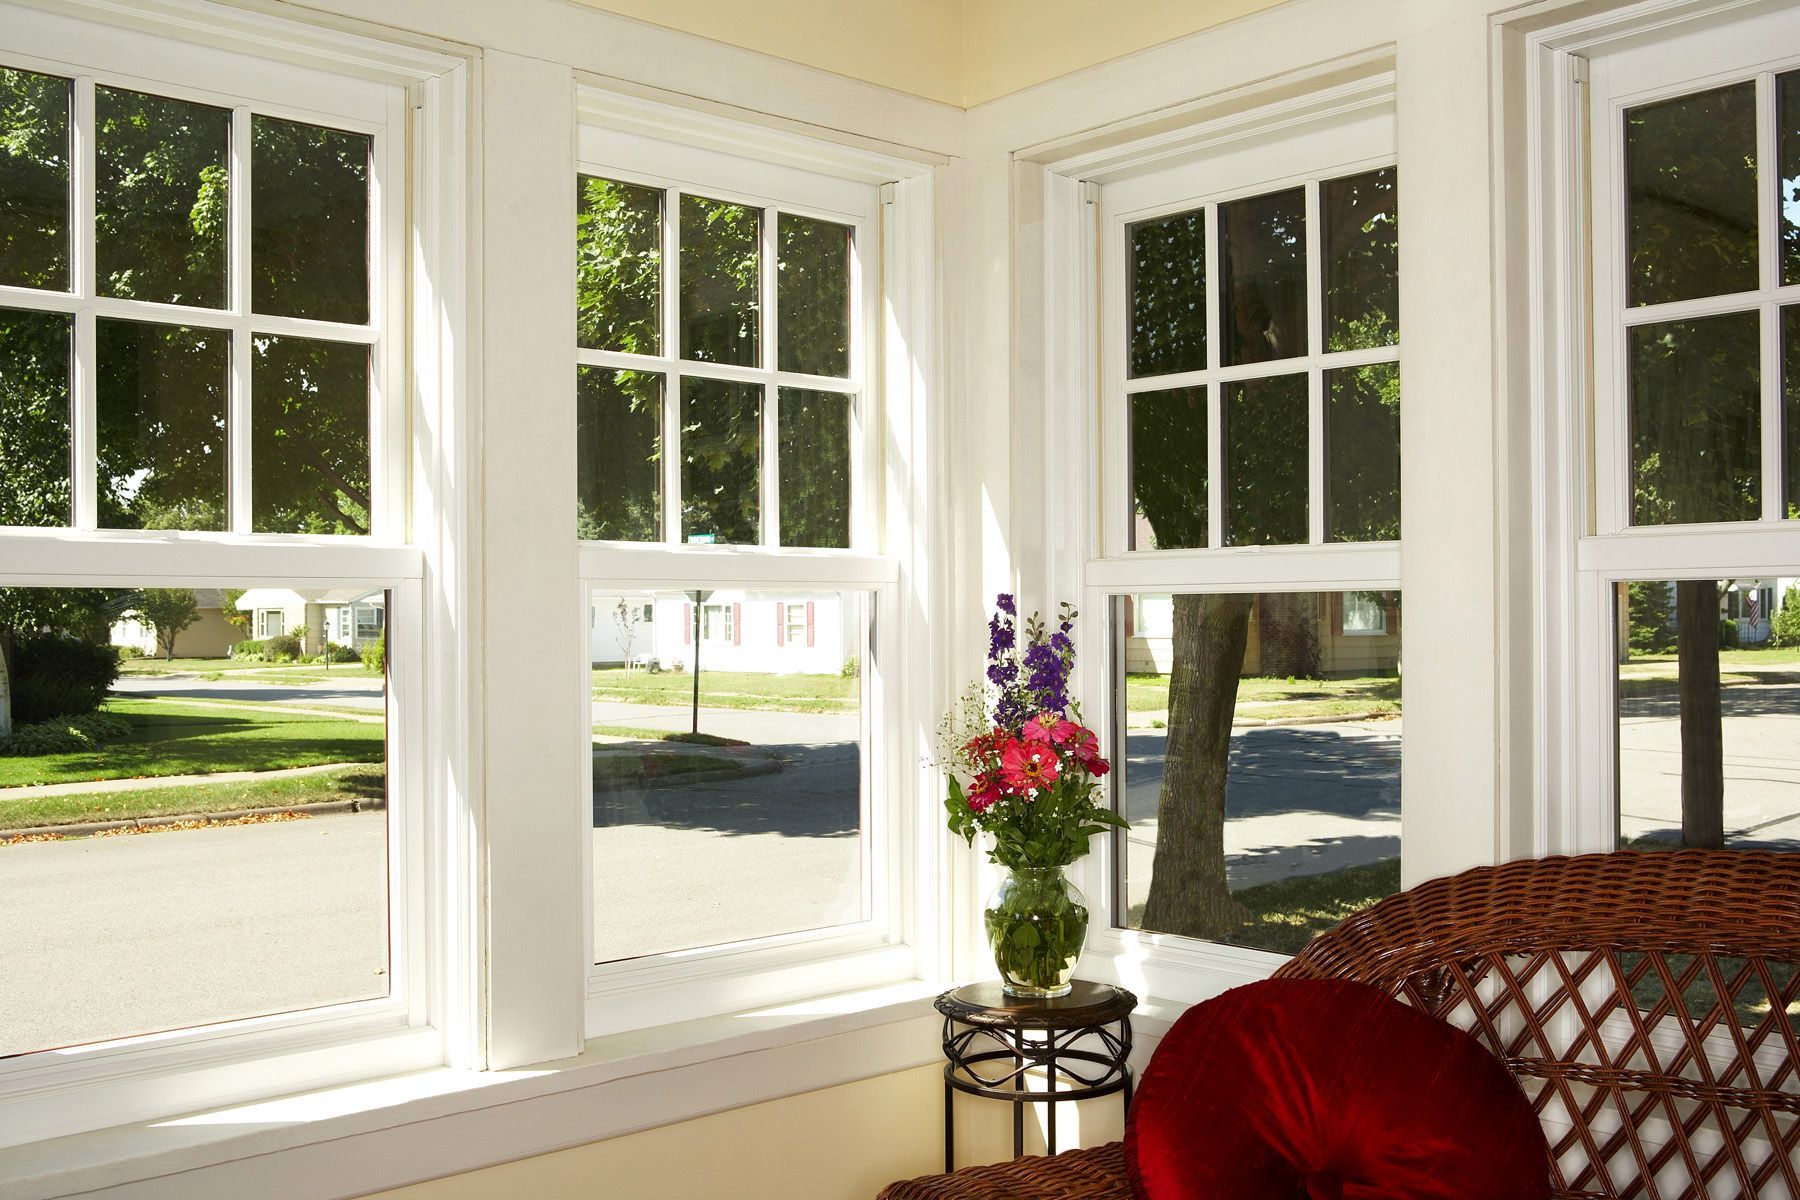 Windows installed by Greenergy can improve your homes efficiency